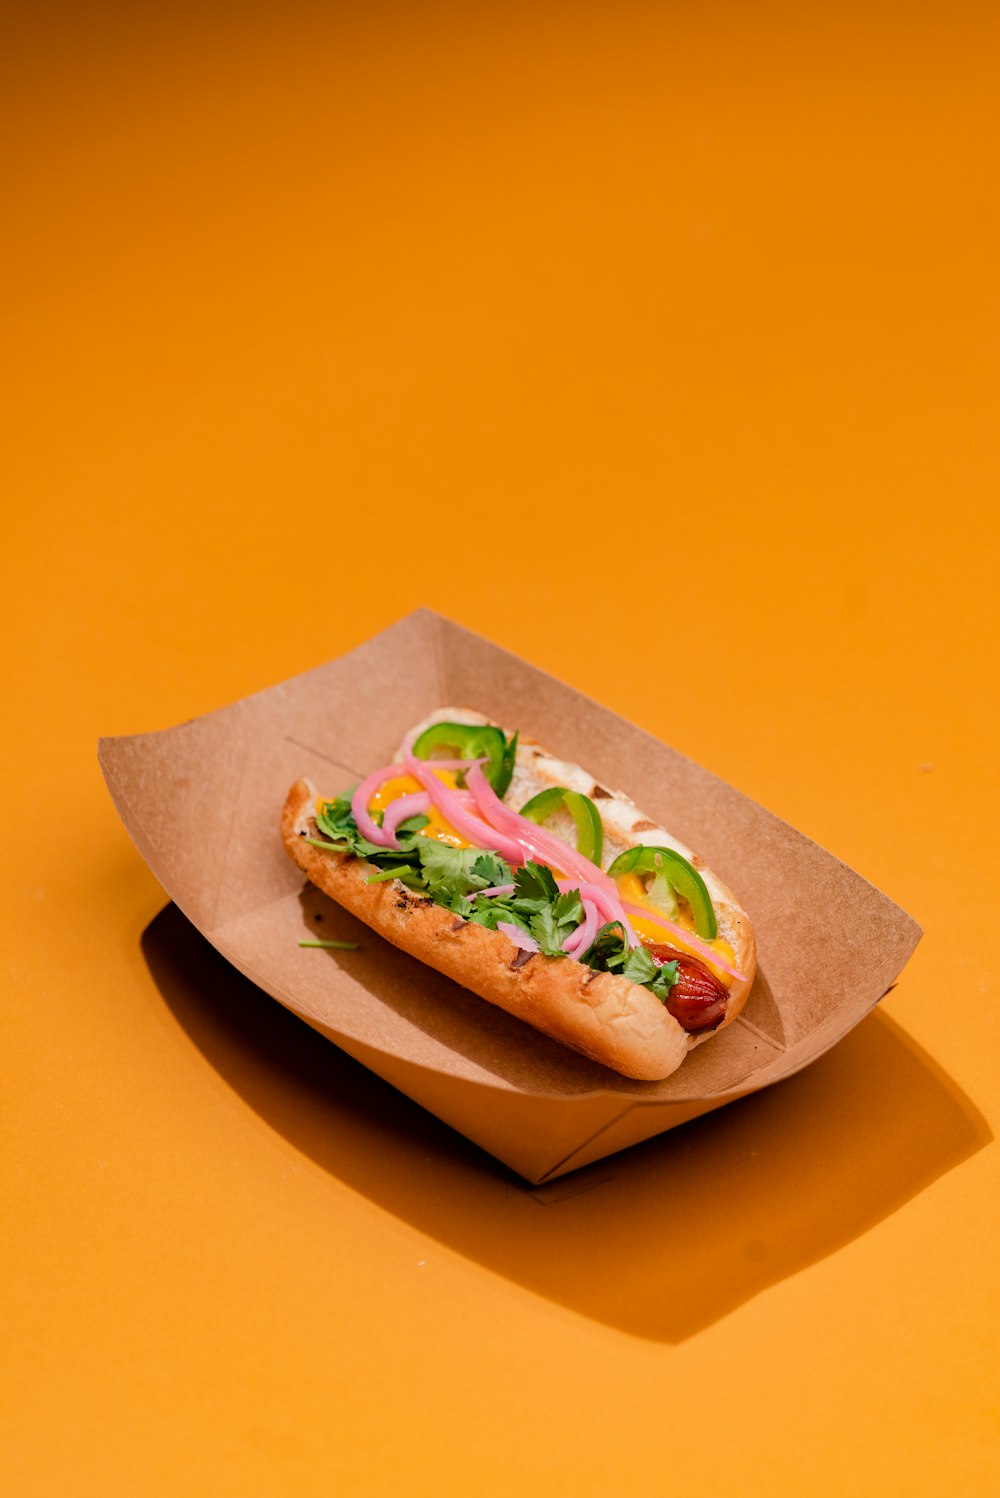 a hot dog in a paper container on a yellow surface